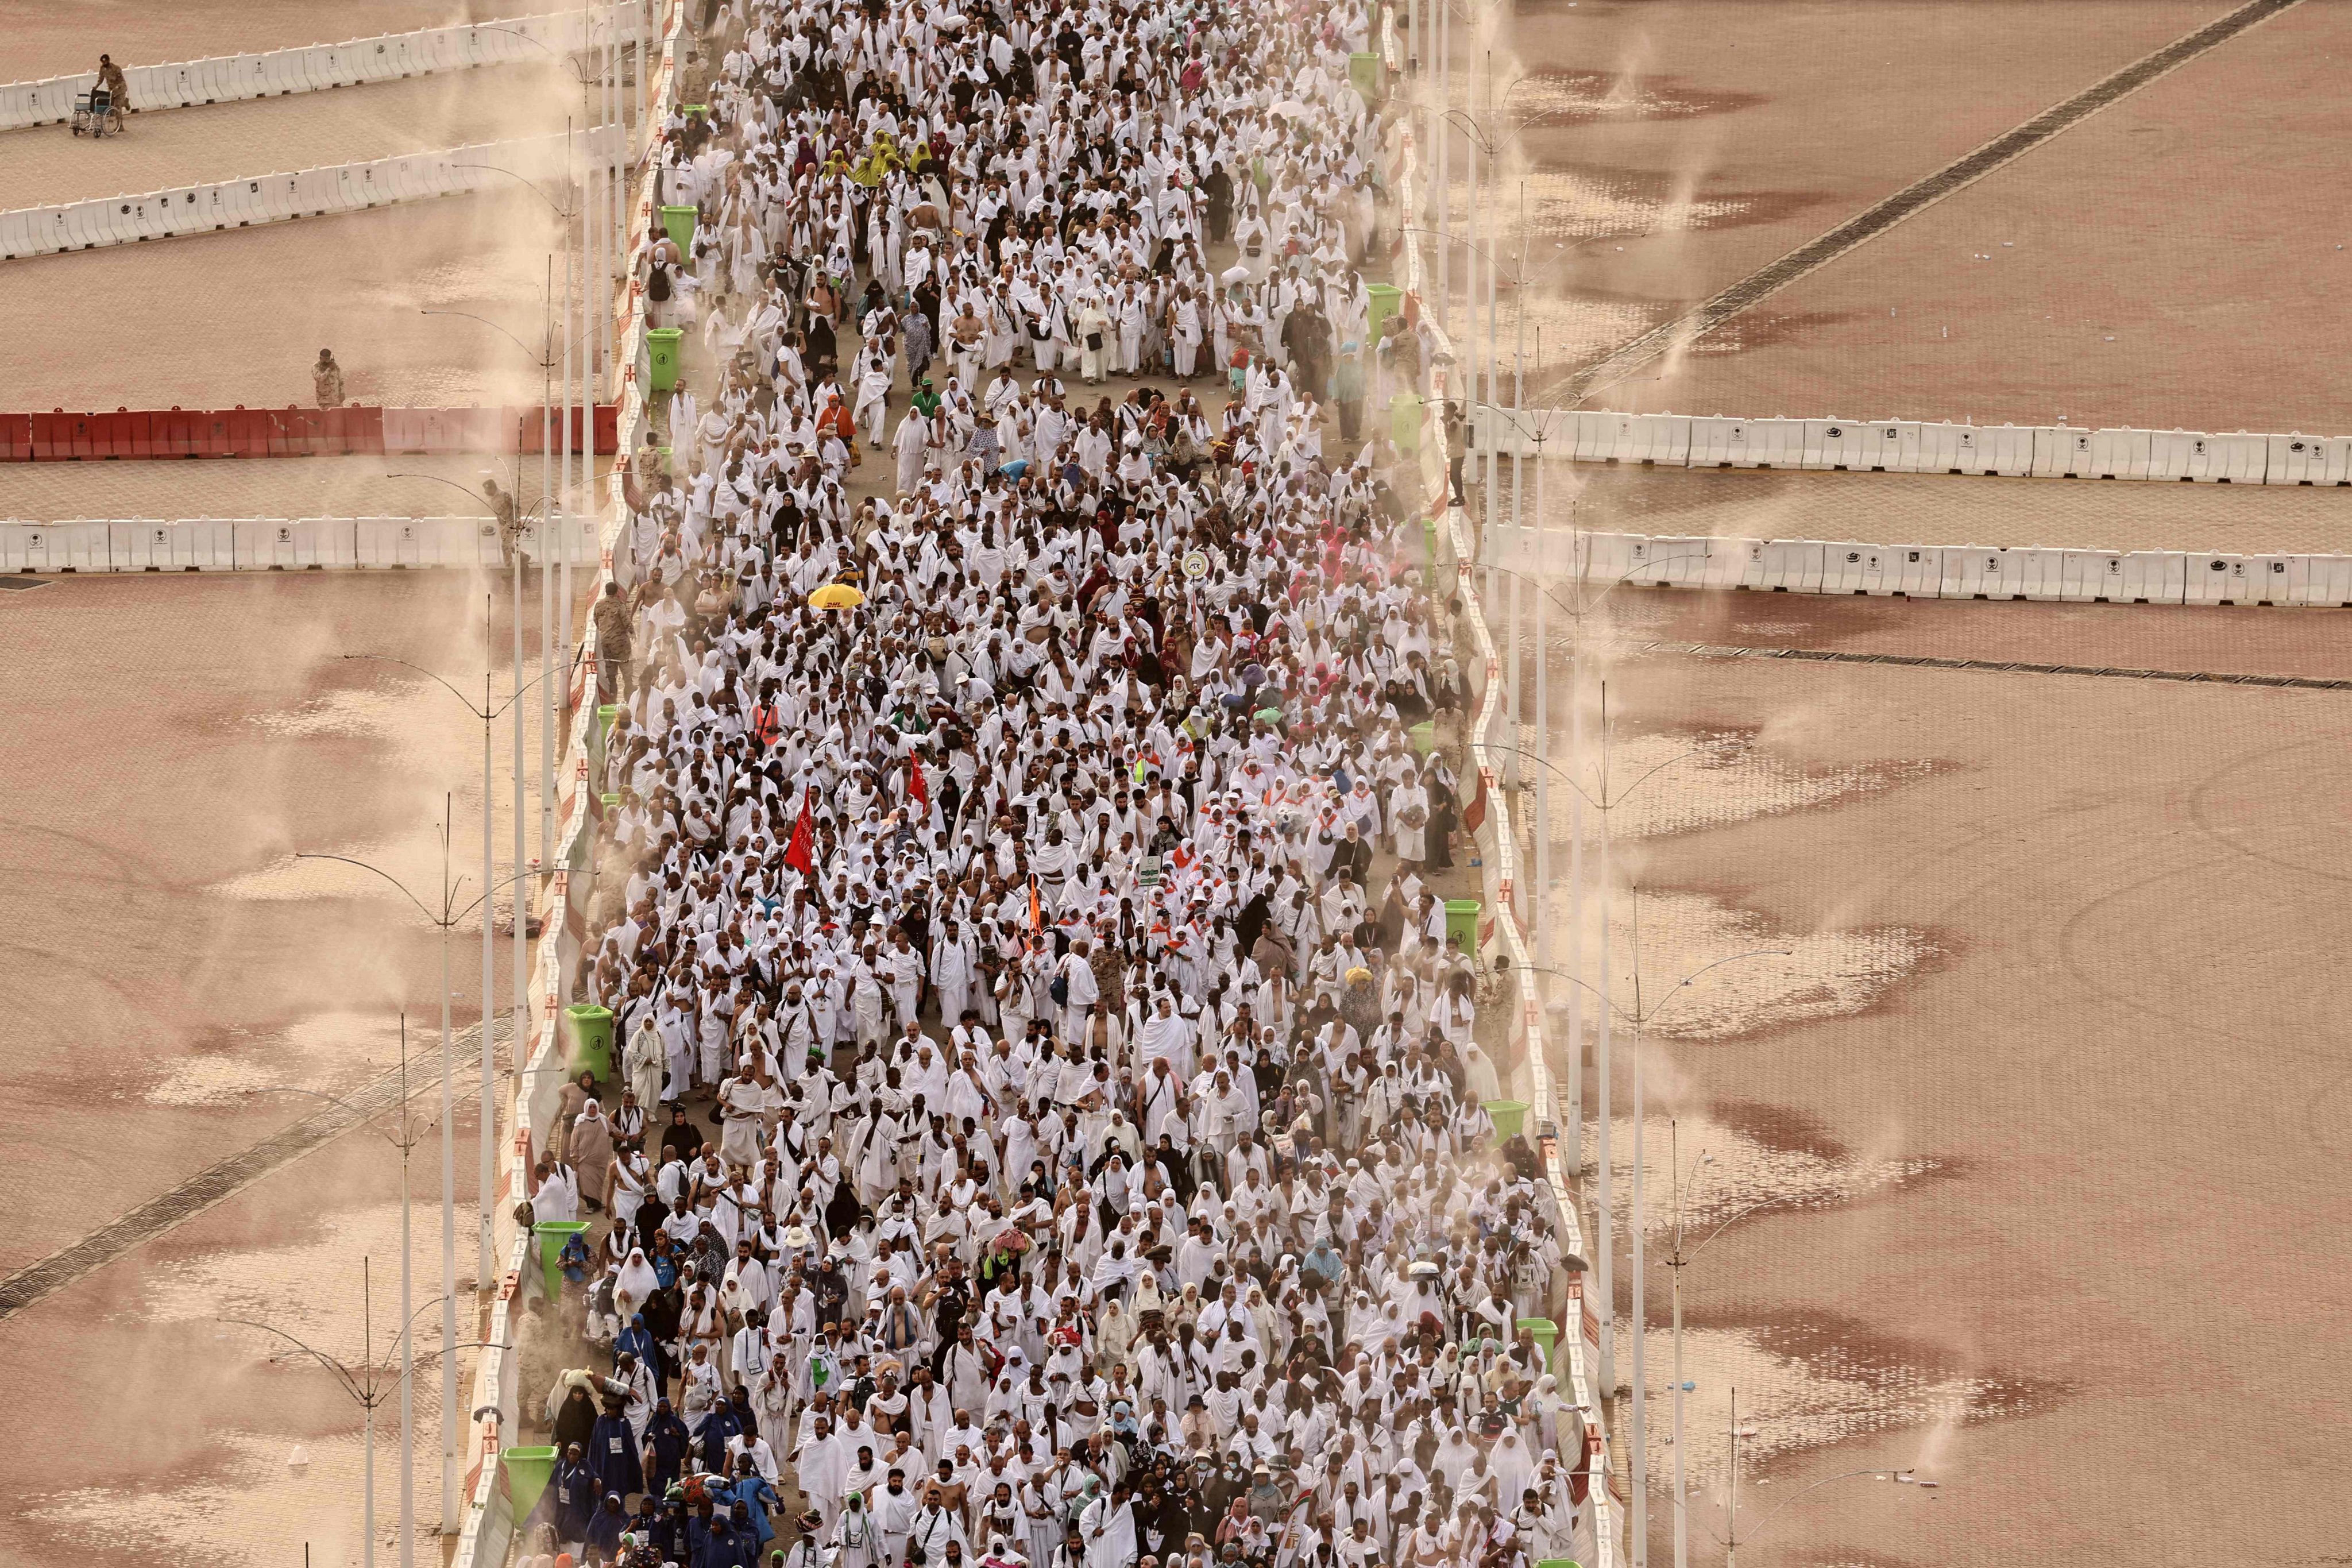 Muslim pilgrims arrive to perform the symbolic ‘stoning of the devil’ ritual on Sunday. Photo: AFP